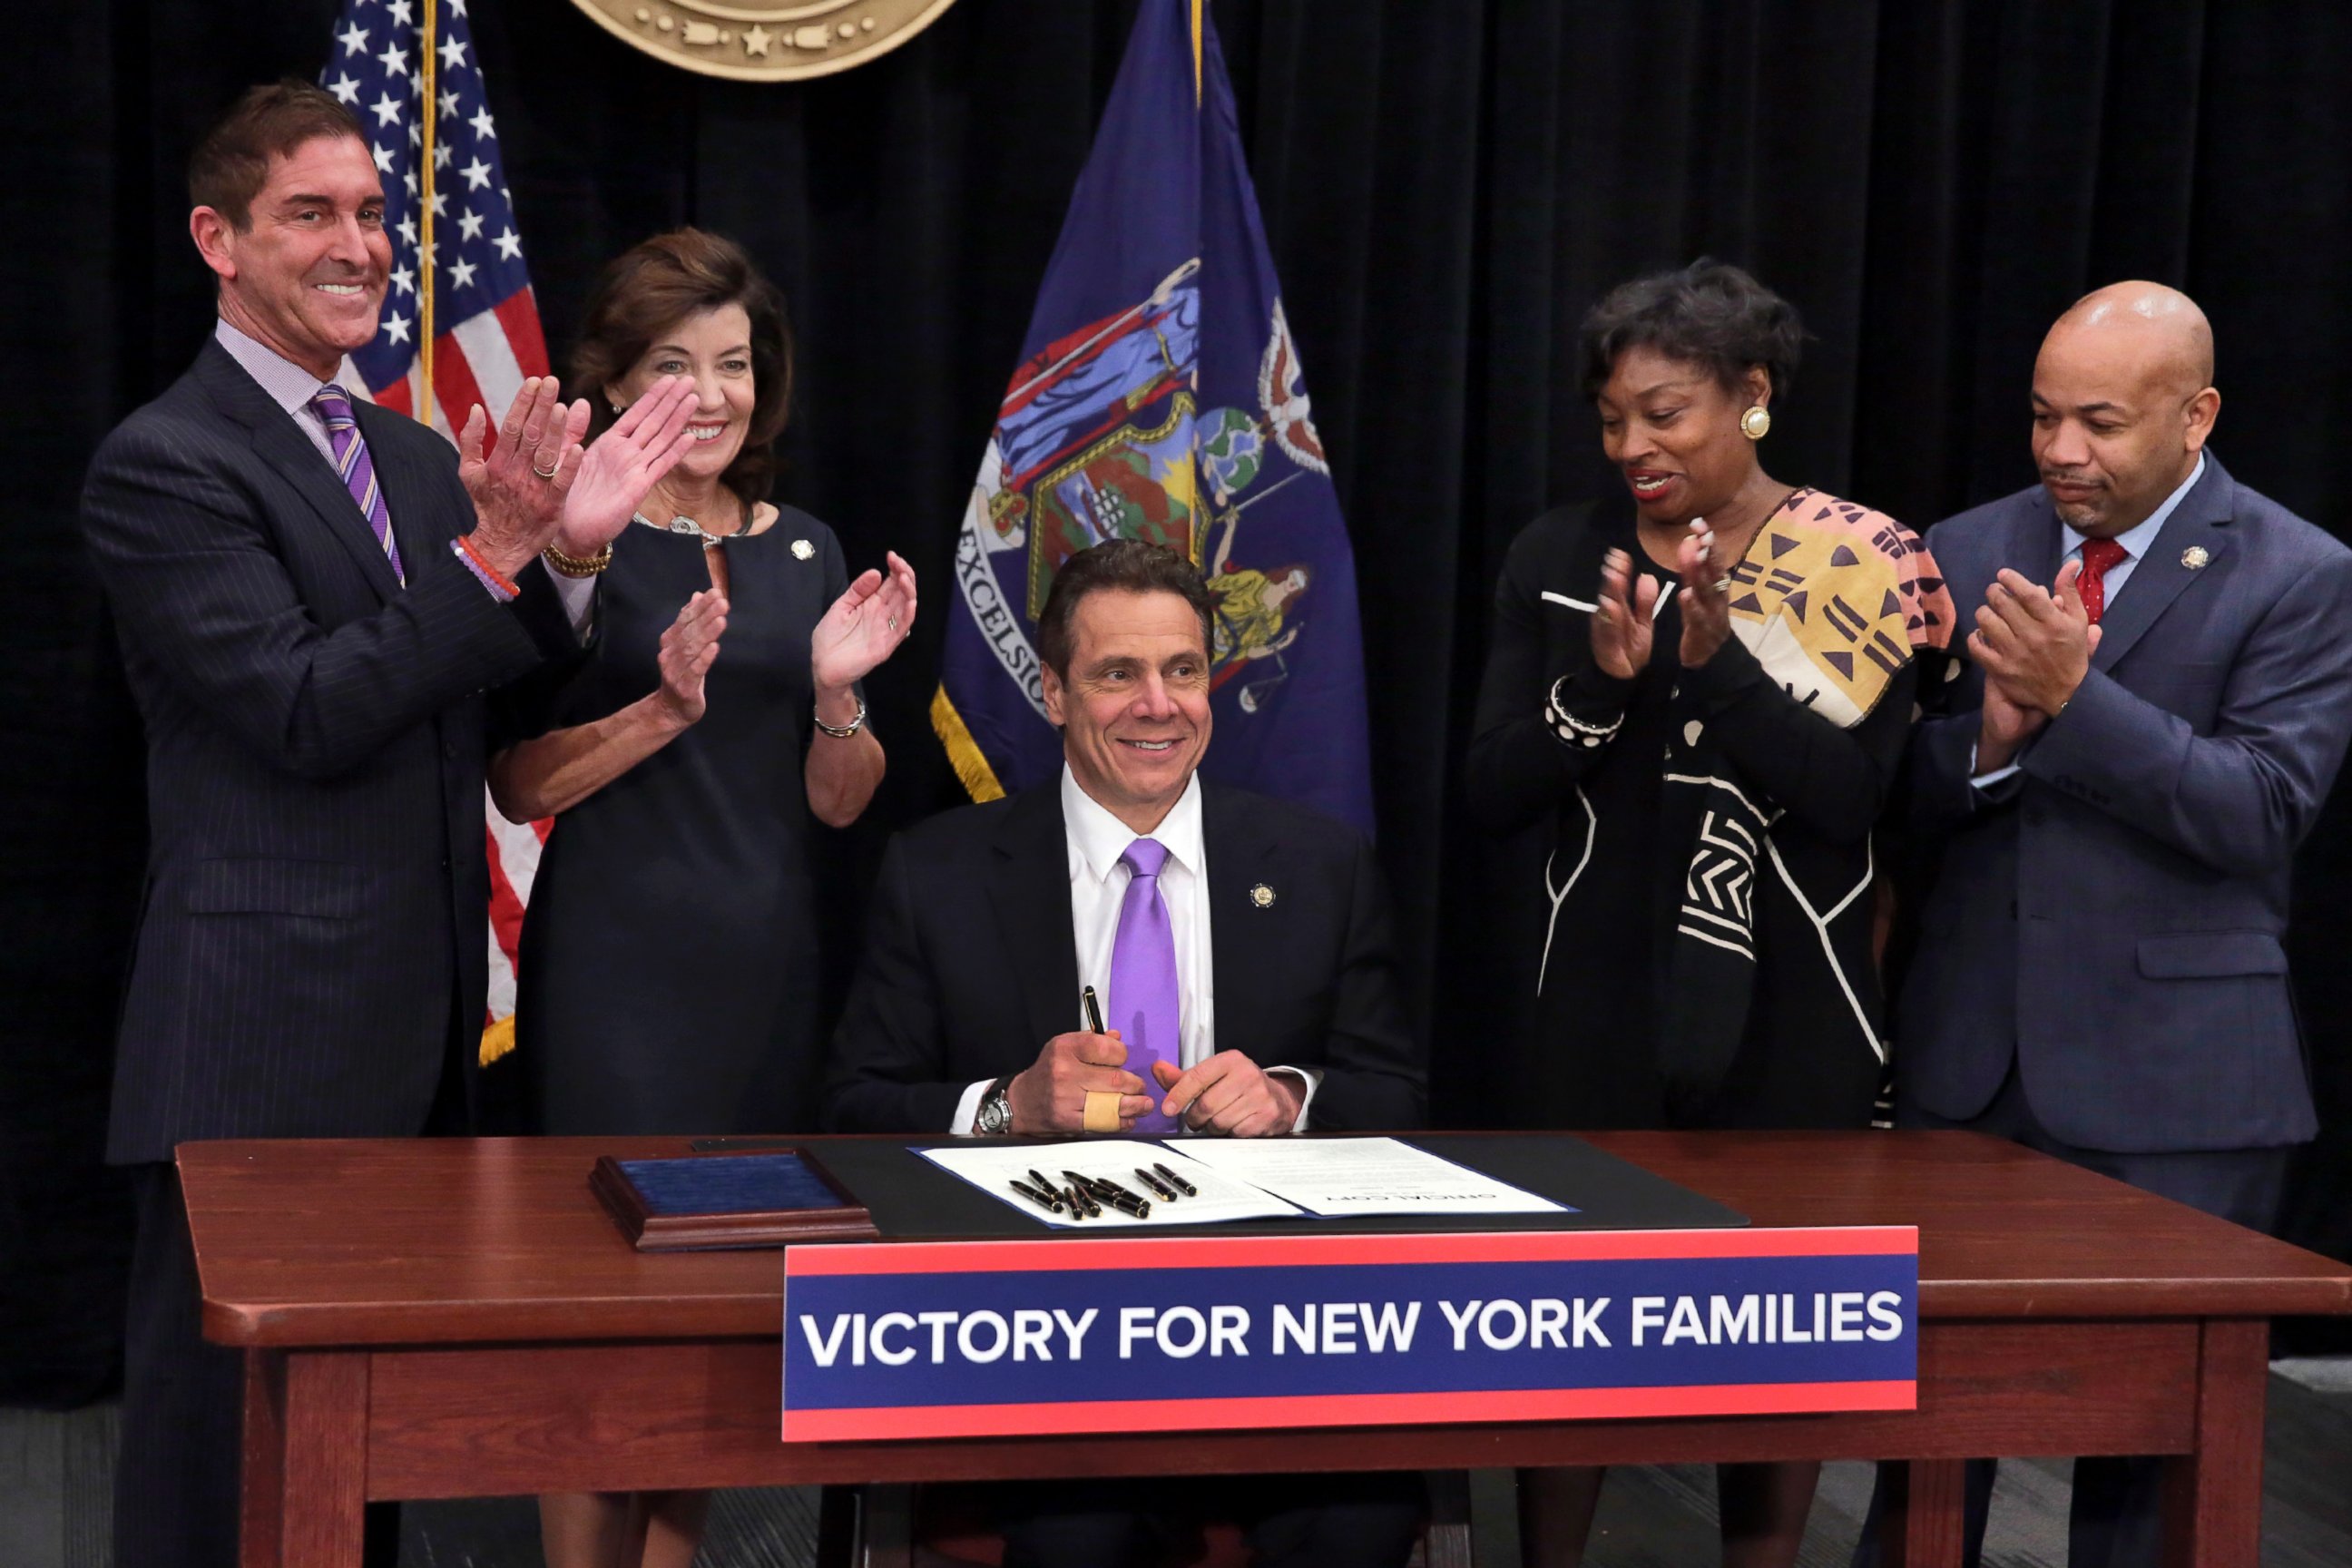 PHOTO: New York Gov. Andrew Cuomo is applauded after he signed a law that will gradually raise New York's minimum wage to $15 at the Javits Convention Center in New York, Monday, April 4, 2016.